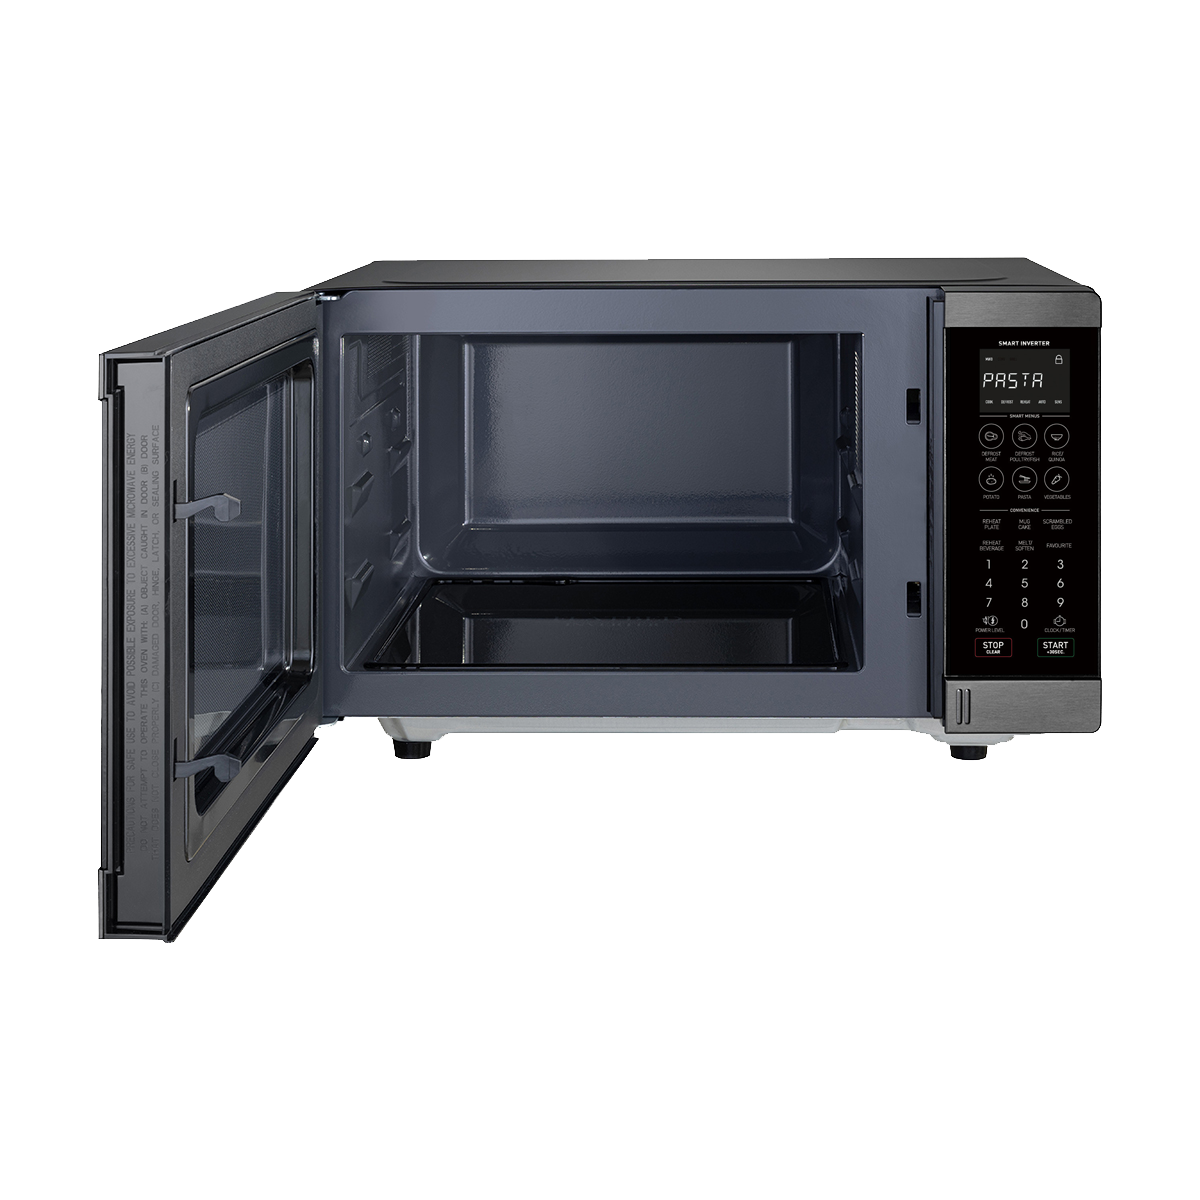 Flatbed Microwave 1200W - Black Stainless Steel